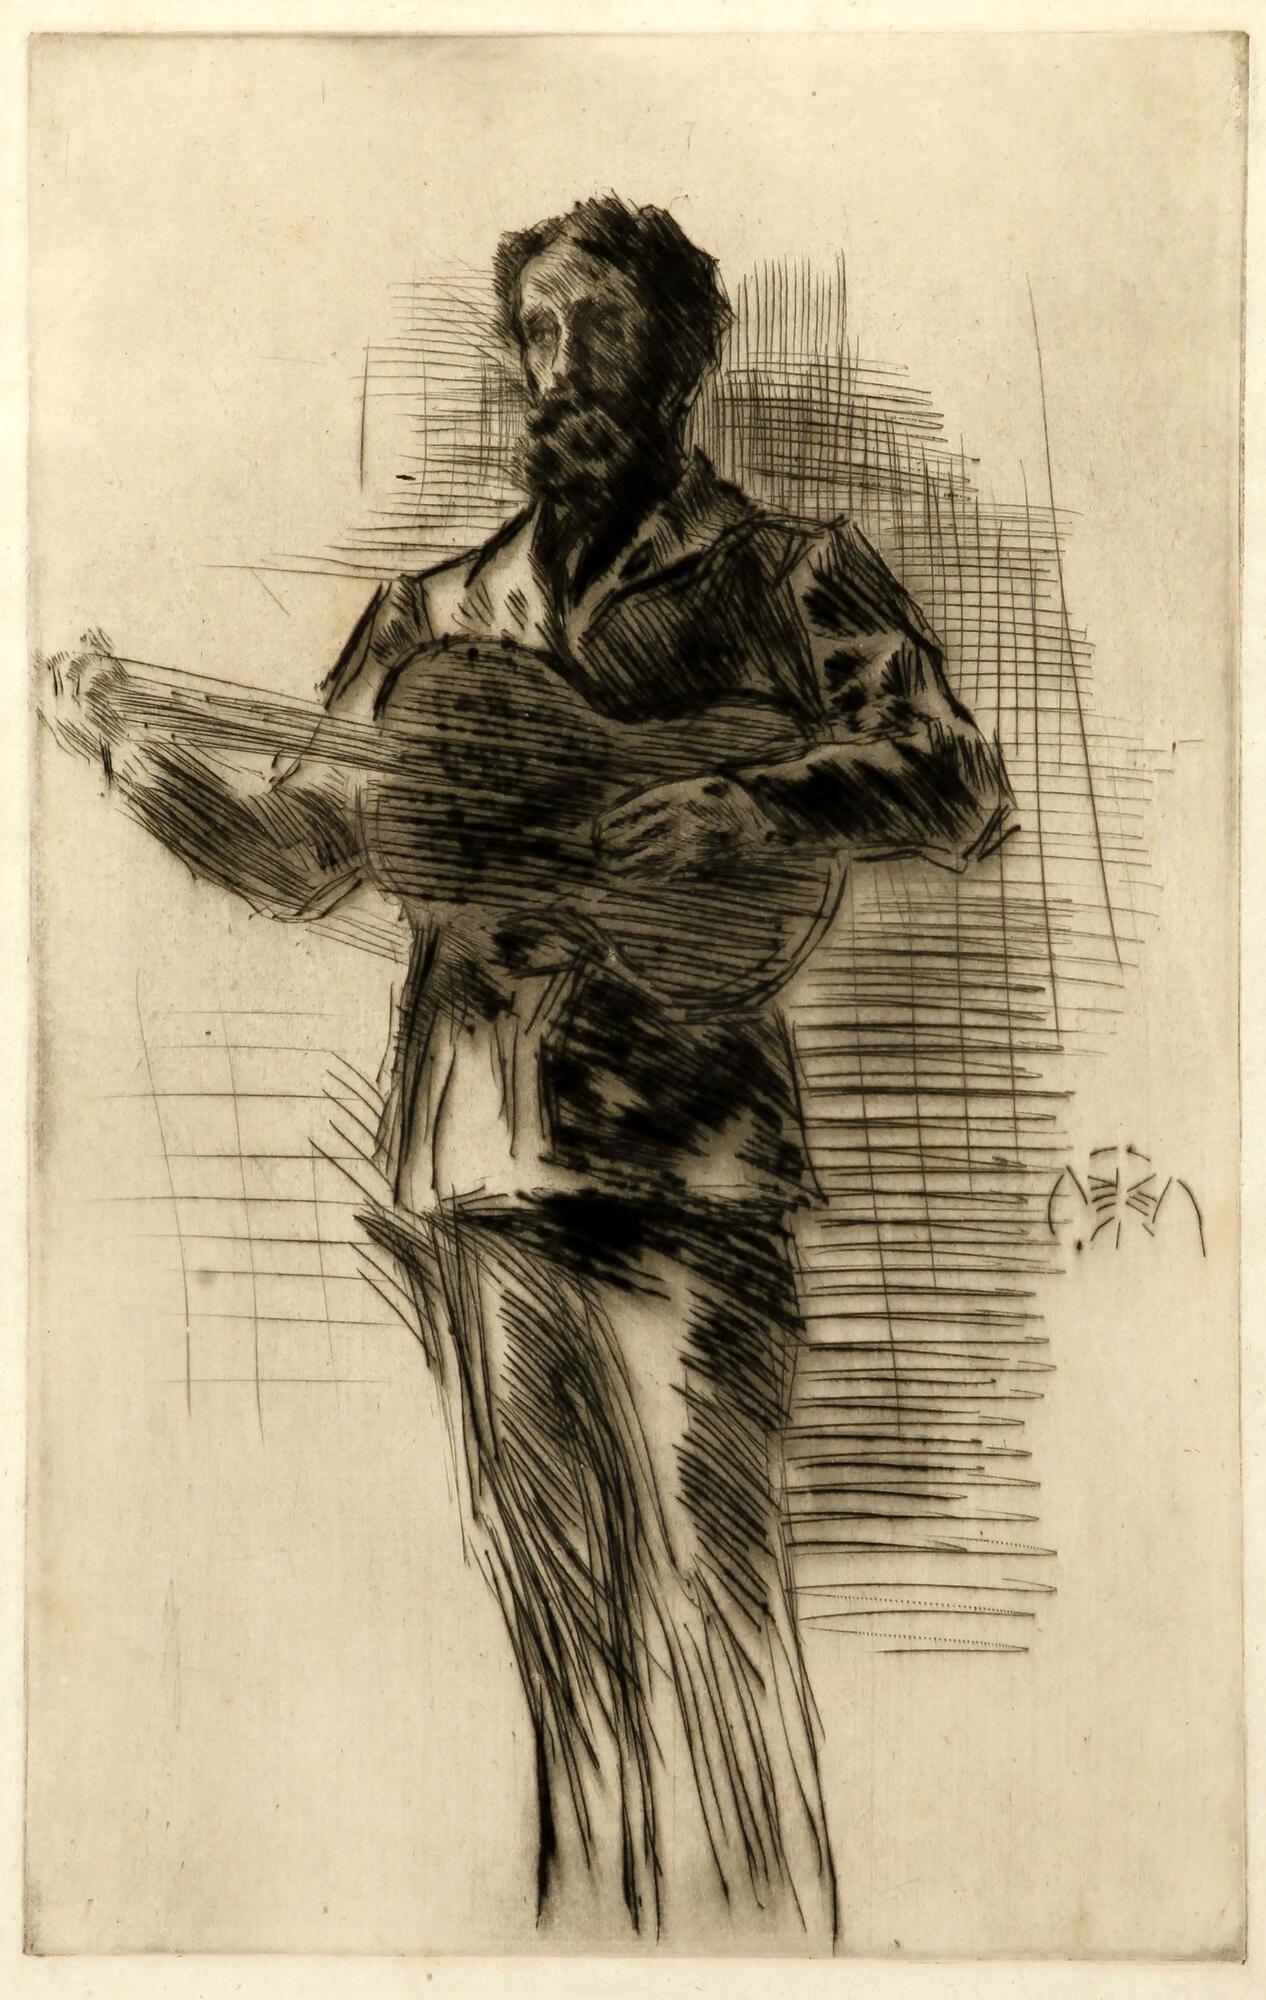 A man with moustache and beard stands facing slightly towards the left, strumming a guitar.